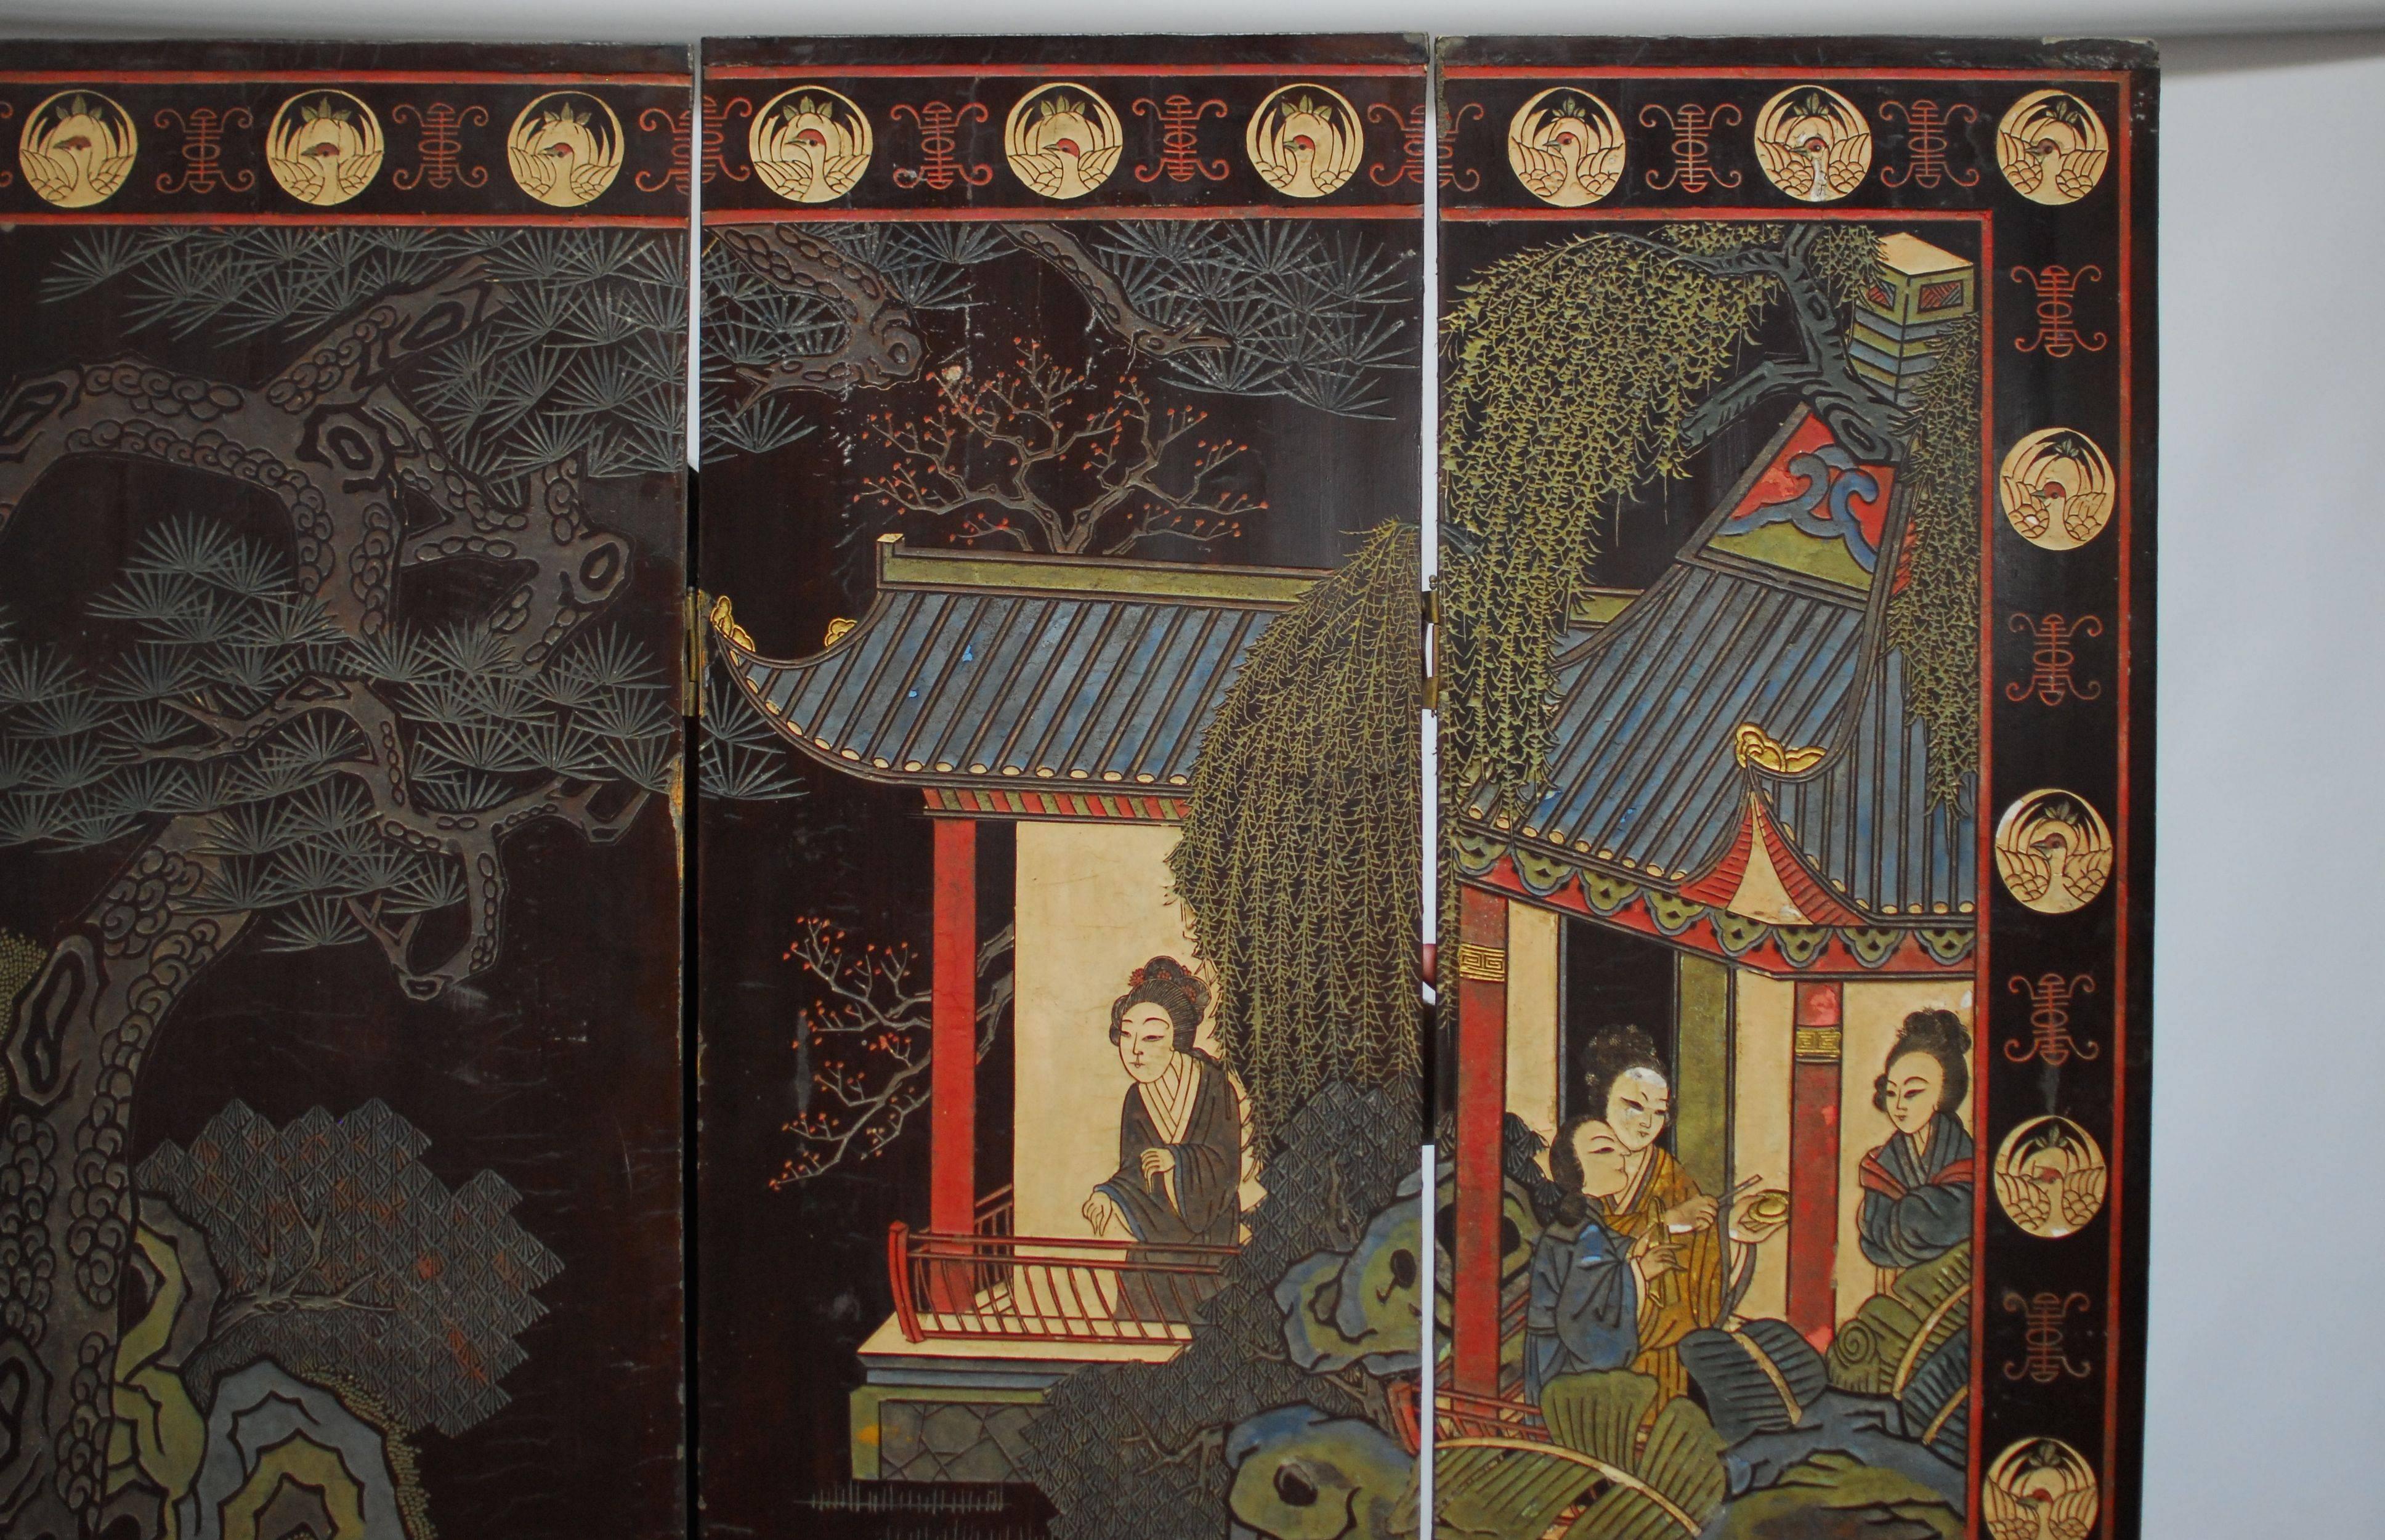 4 panel Chinese Coromandel folding screen depicting Imperial court ladies and colorful pagodas with a border of white cranes. The reverse side is decorated with cranes and trees. Older screen with lovely faded lacquer patina and major losses on the